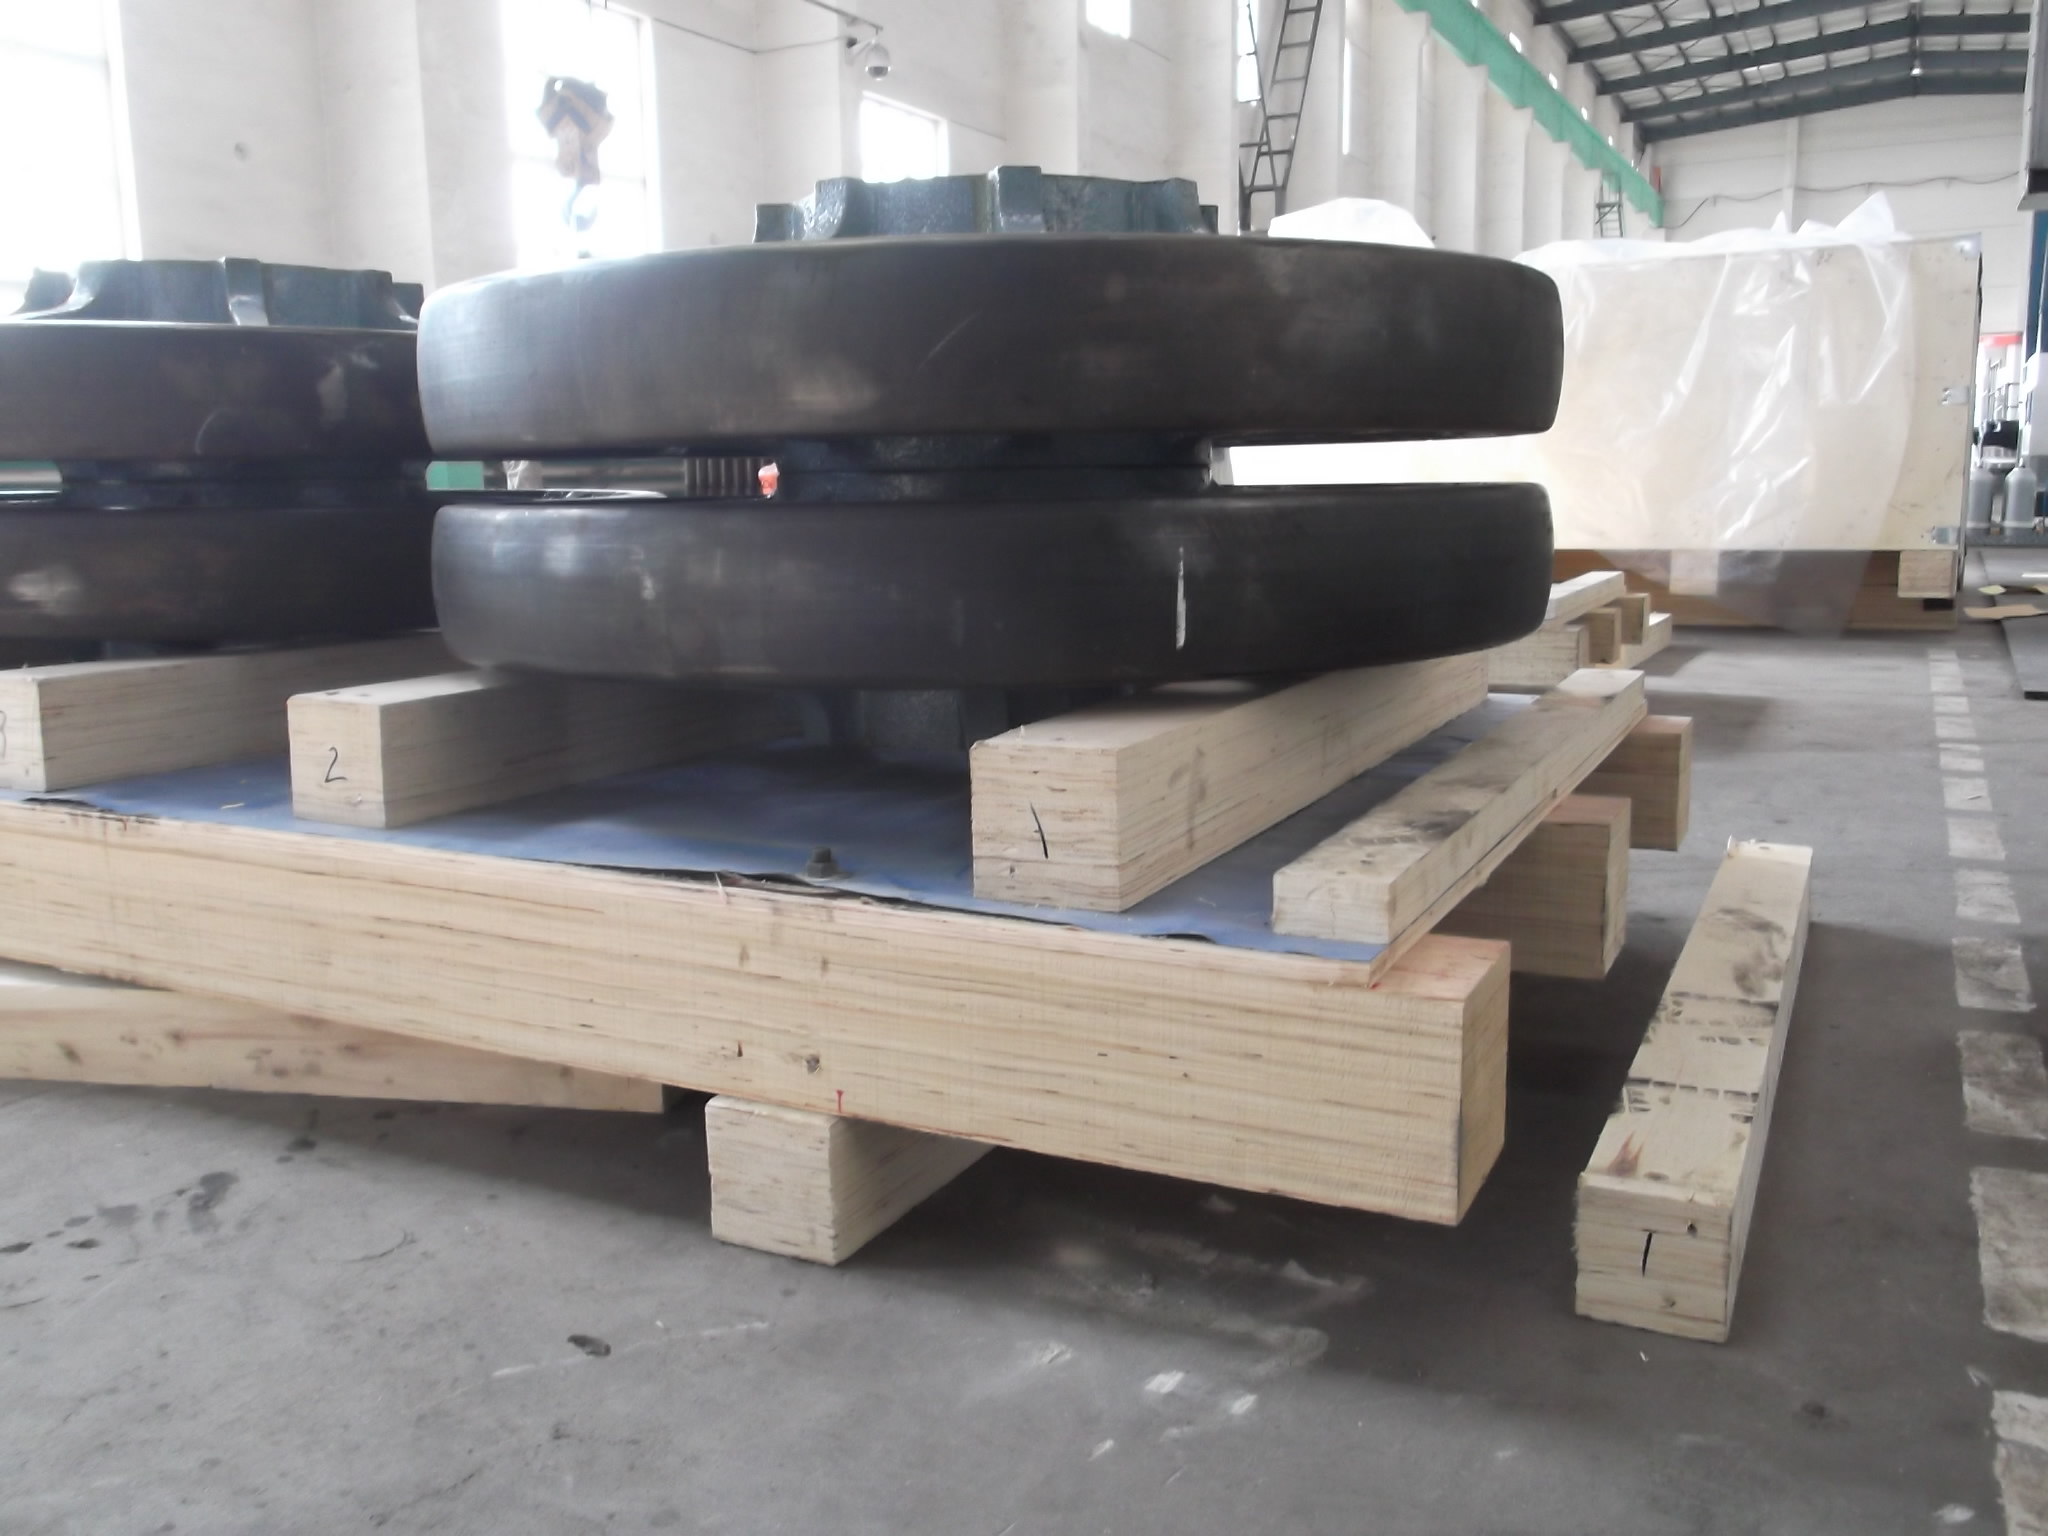 support wheel for heavy mining equipment, casting pieces